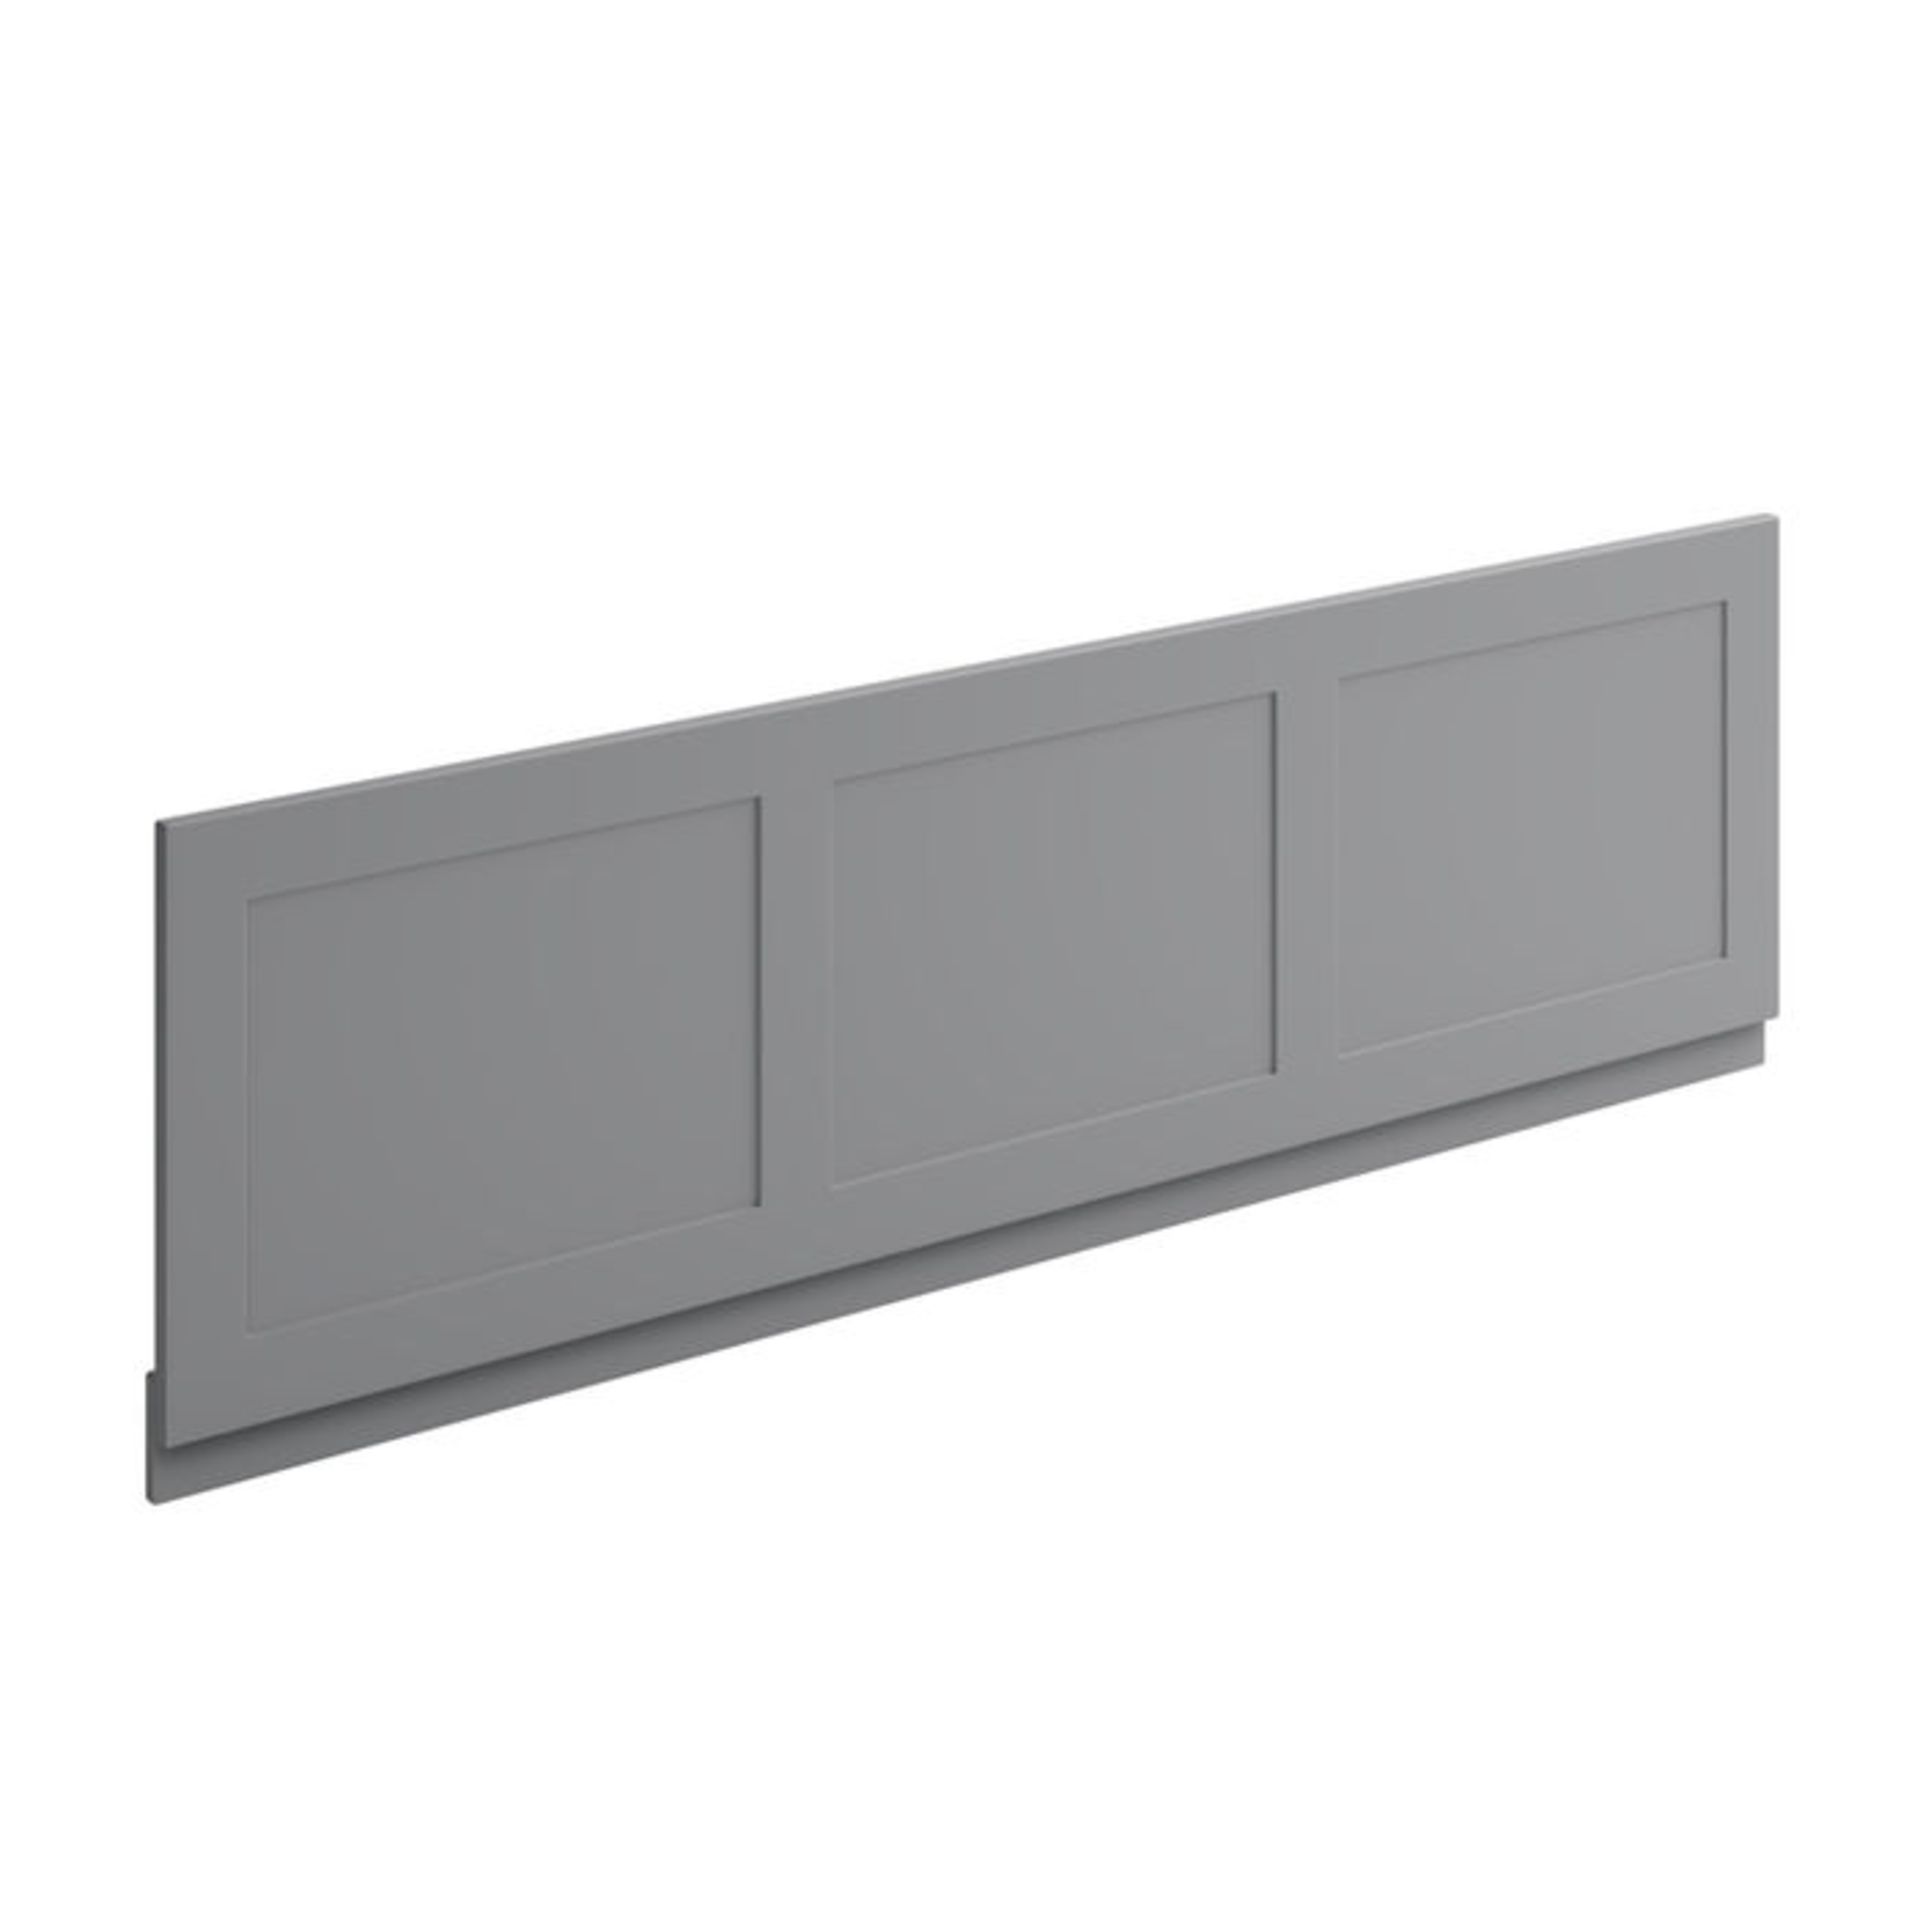 (DW66) 1800mm Melbourne Straight Bath Front Panel - Earl Grey. RRP £109.99. Traditional Earl G... - Image 2 of 2